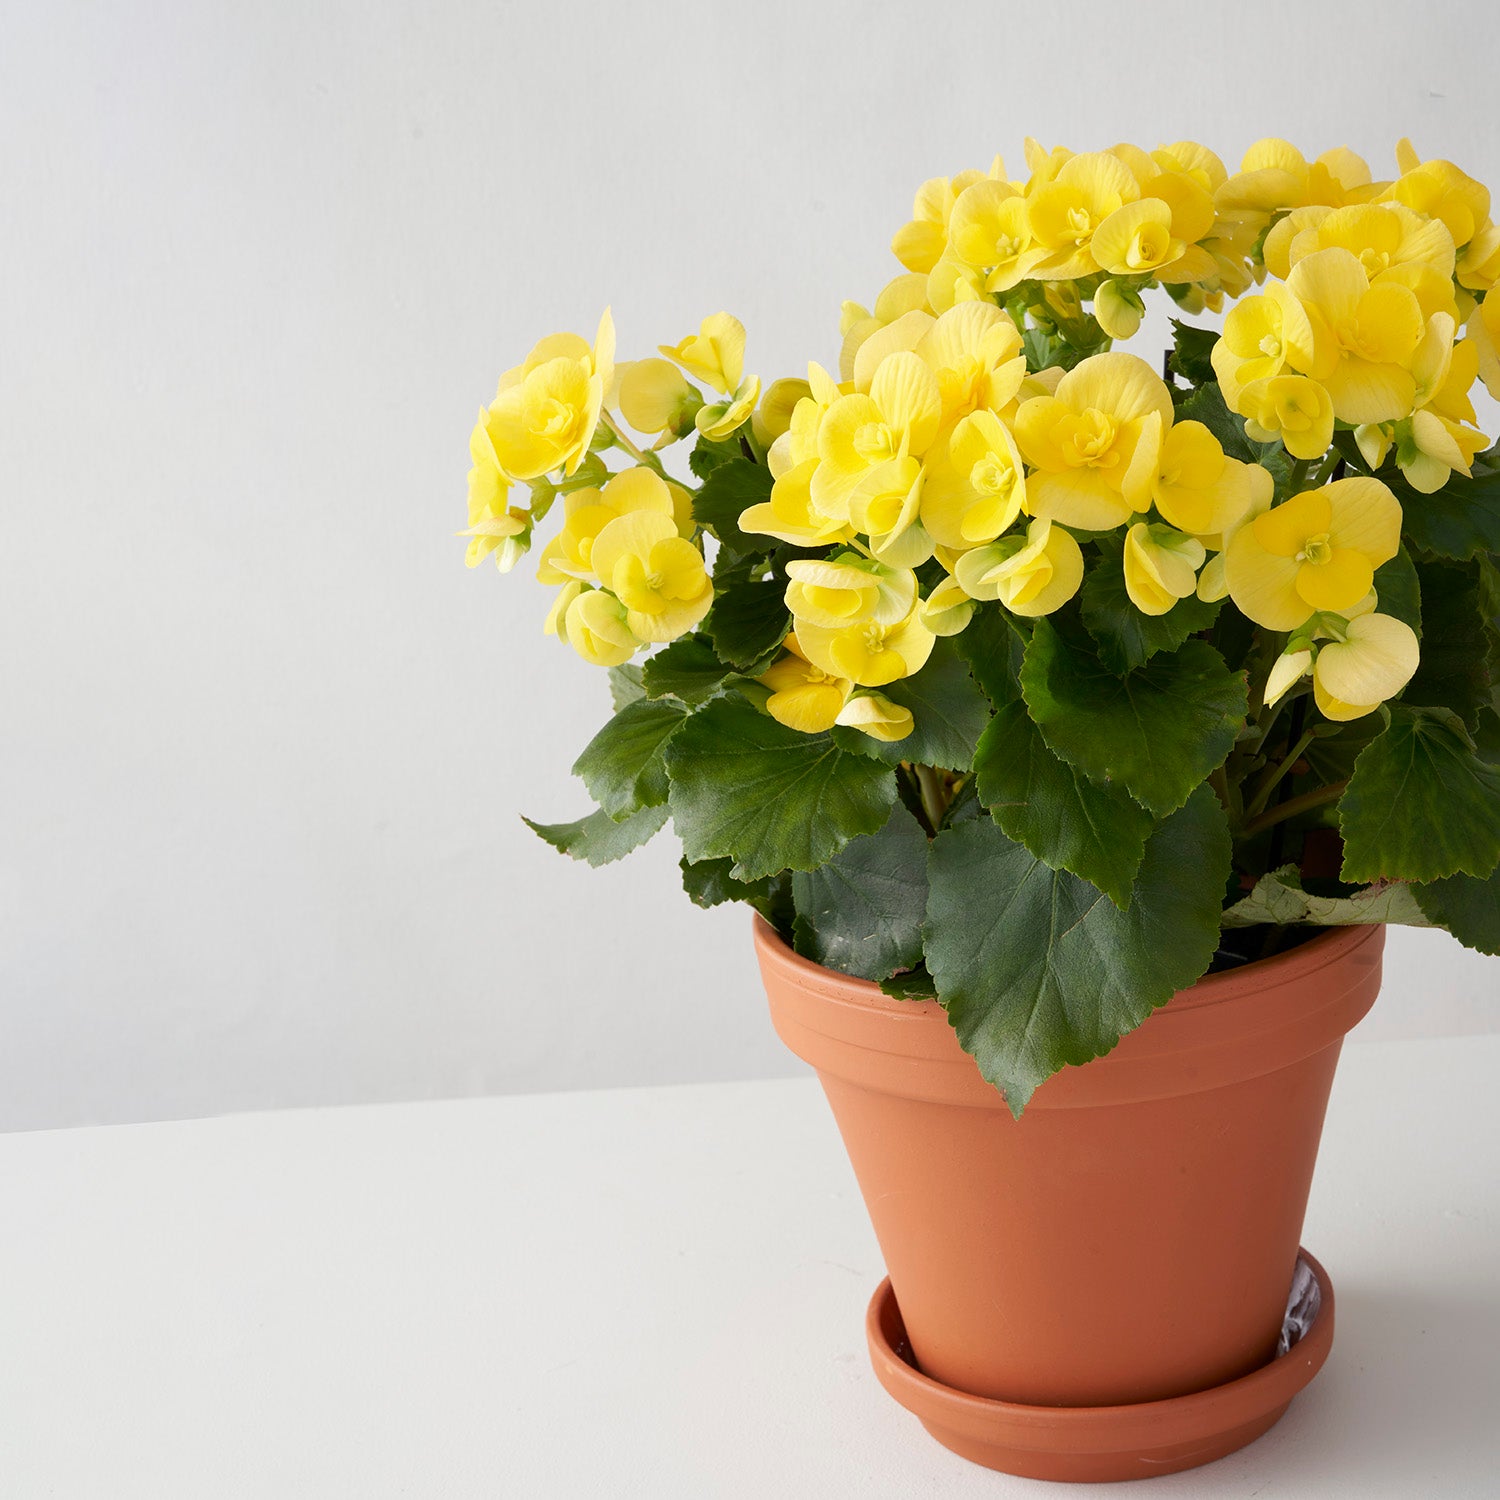 Flowering yellow begonia plant in terracota pot off center on white background.